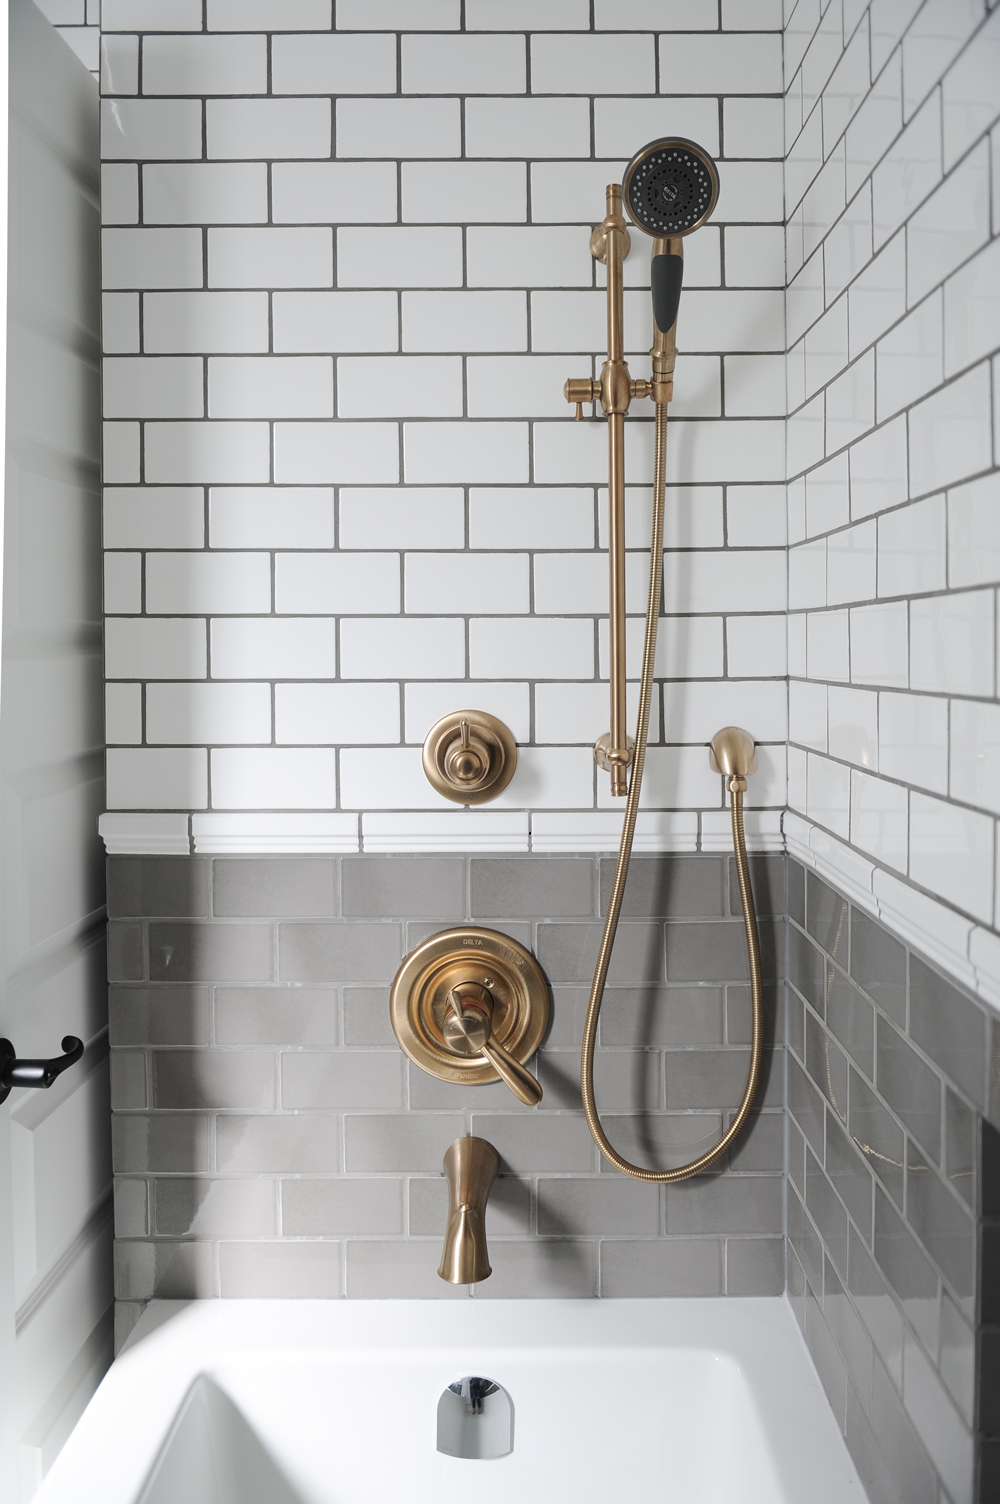 Exposed brass piping in a grey-tiled bathroom